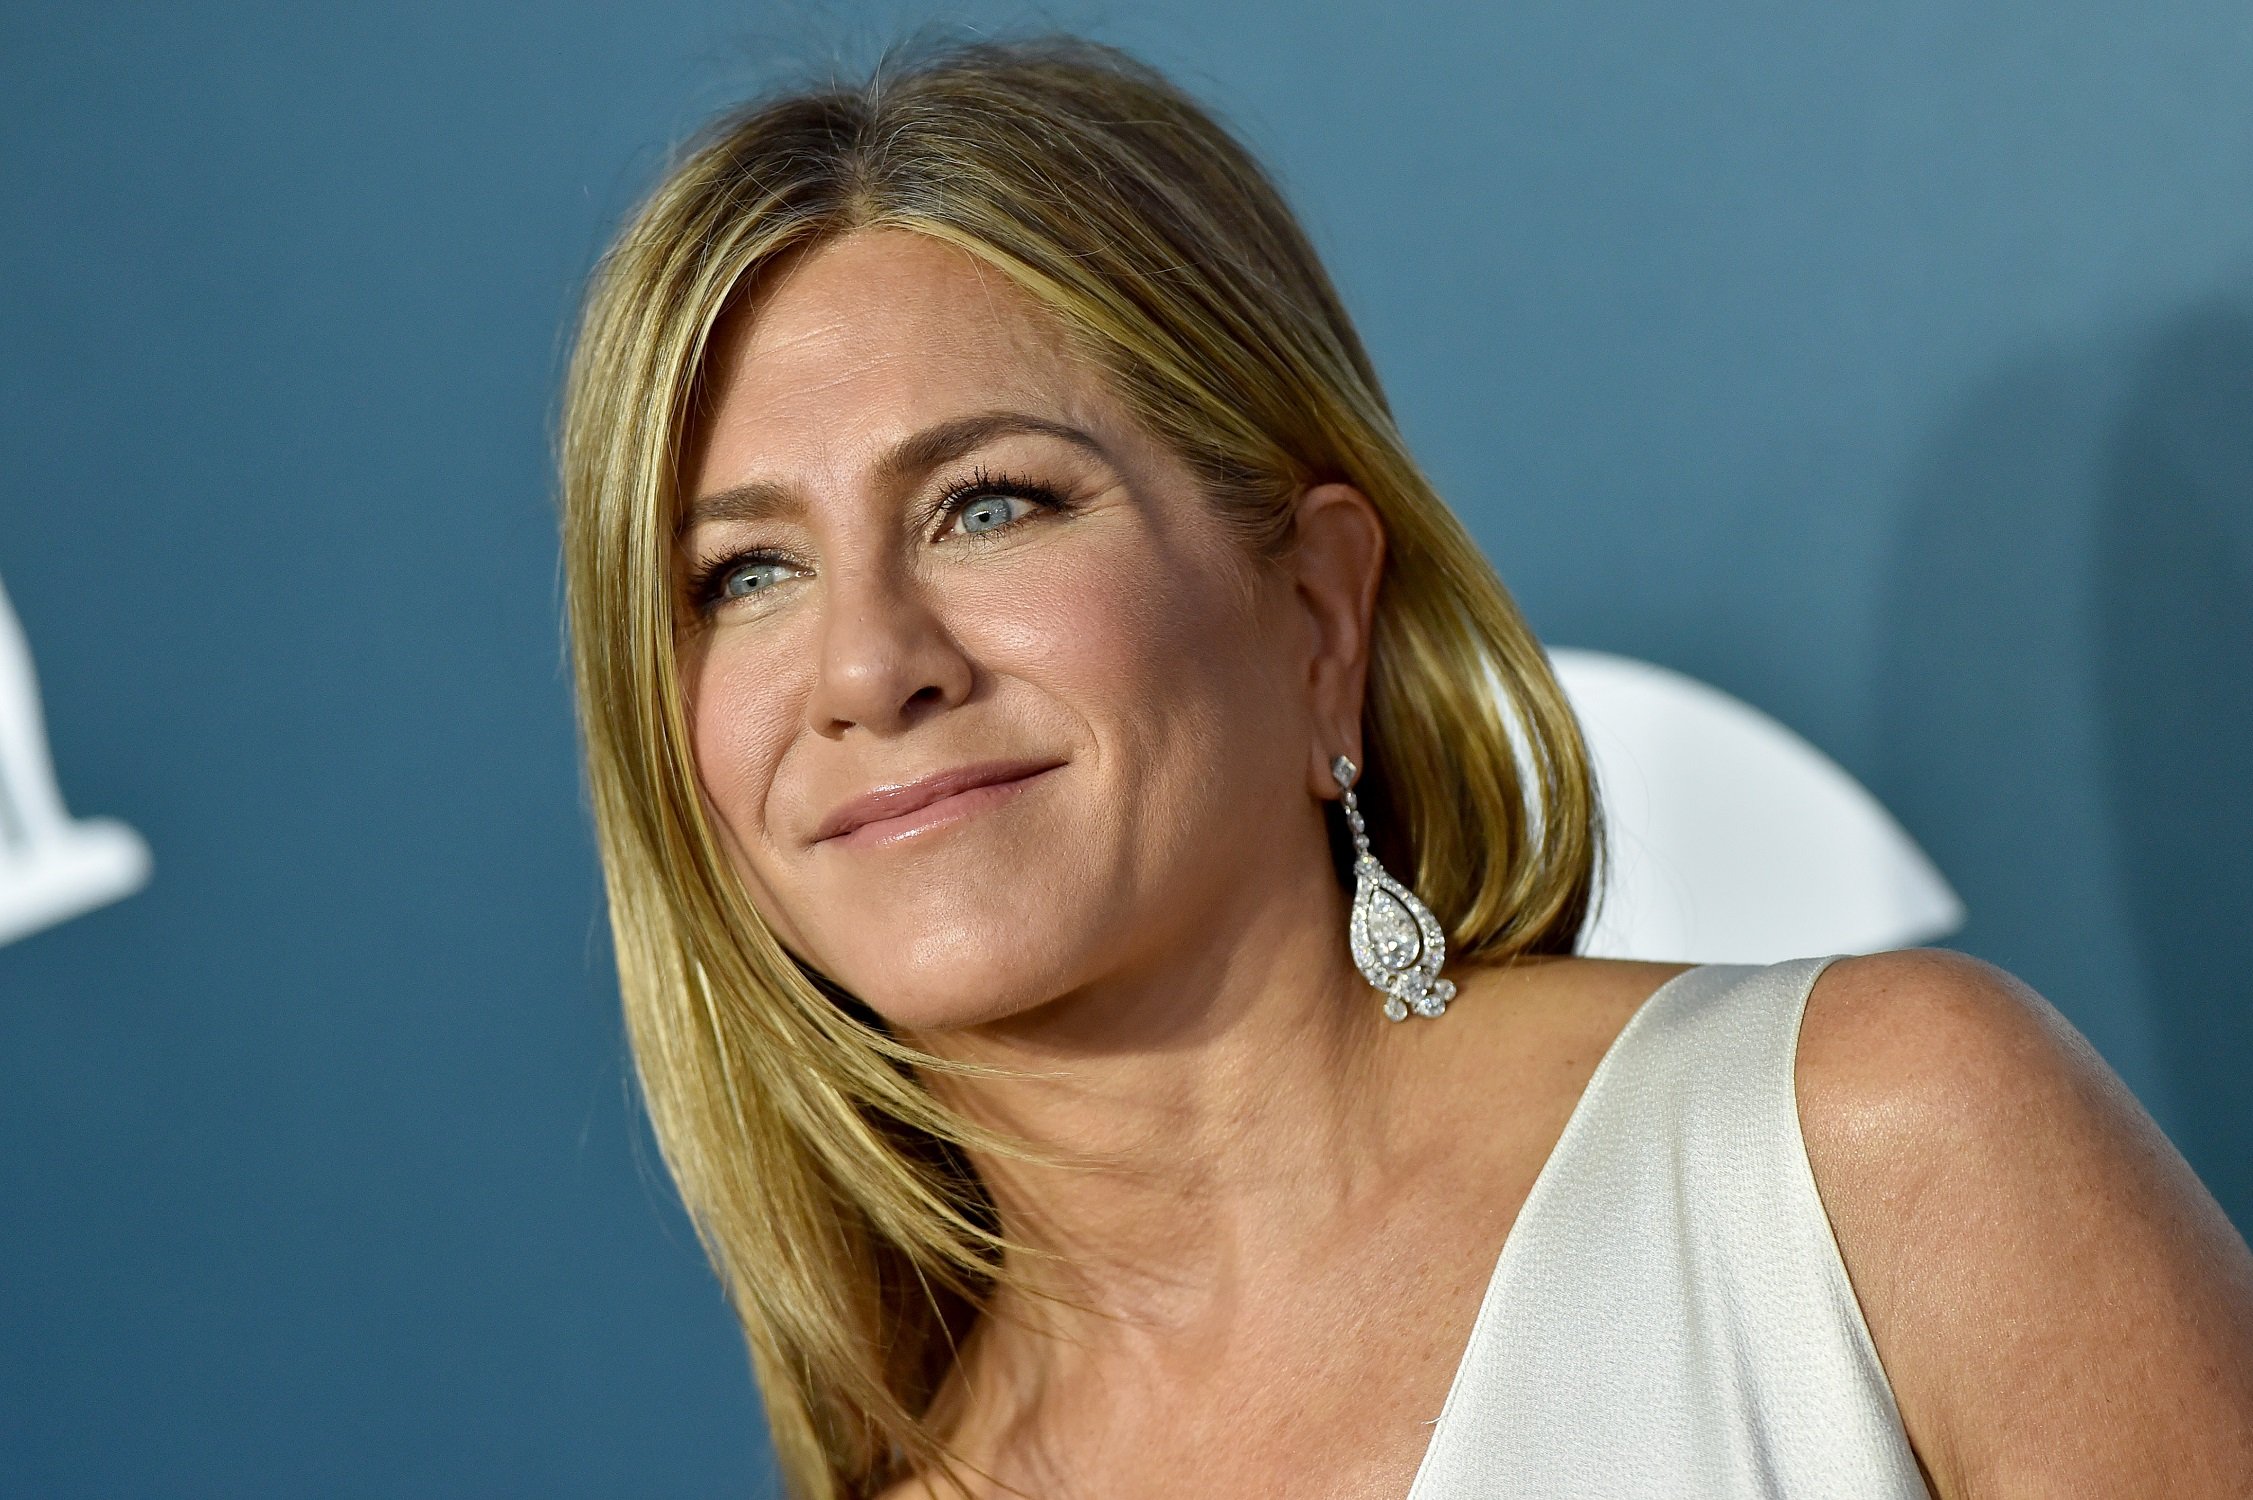 Jennifer Aniston attends the 26th Annual Screen Actors Guild Awards at The Shrine Auditorium on January 19, 2020 